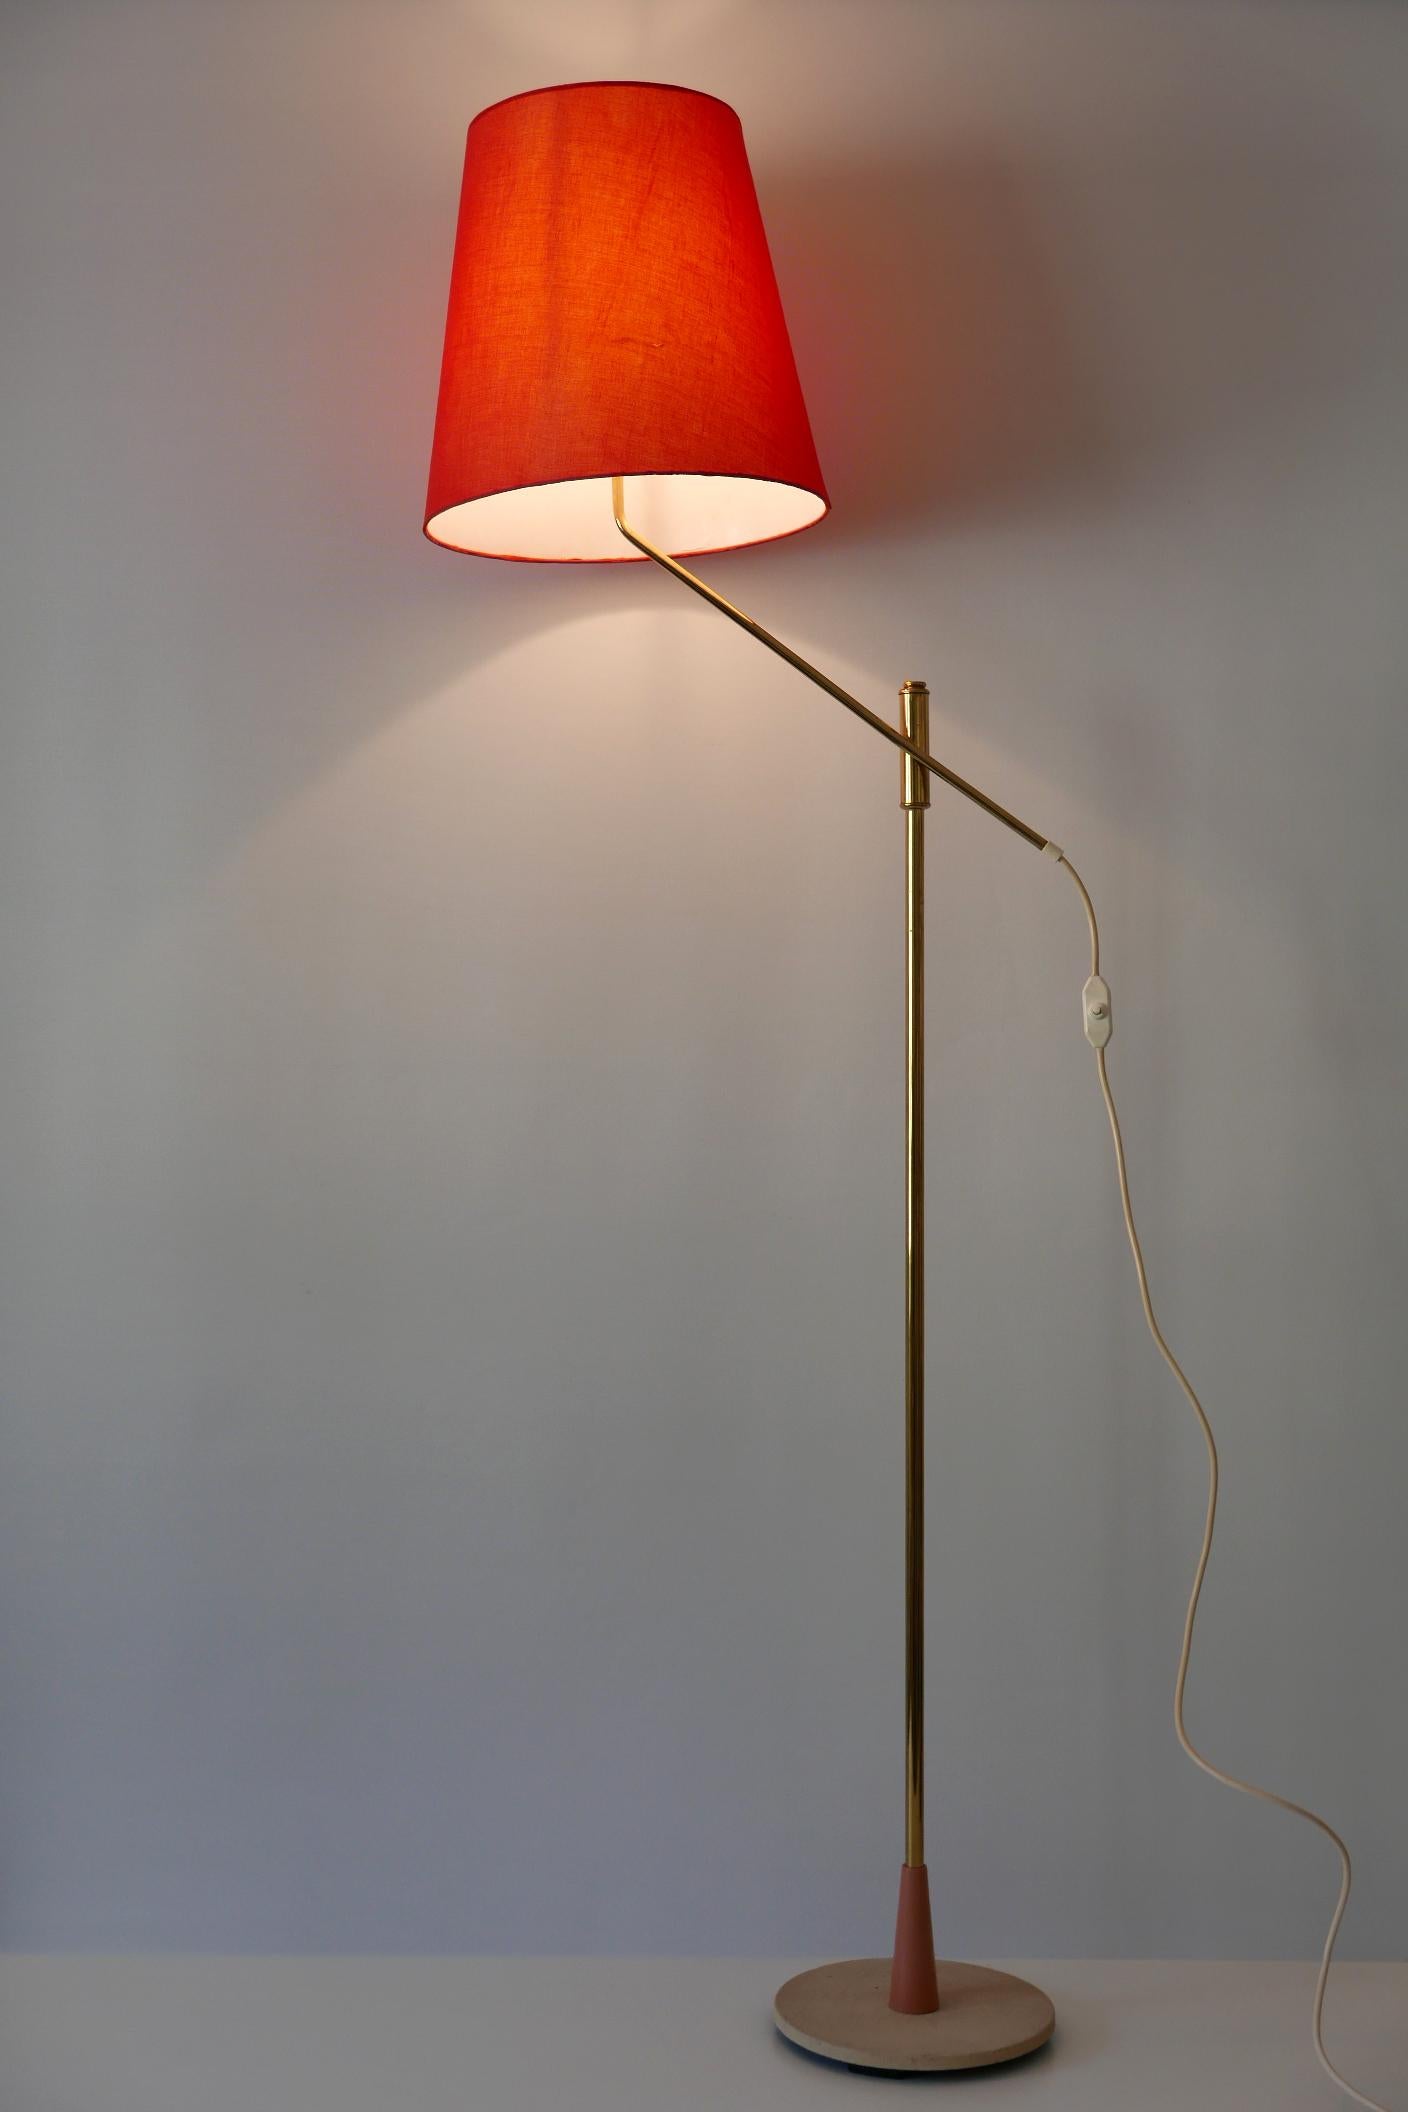 Exceptional, Elegant and Adjustable Mid-Century Modern Floor Lamp 1950s, Germany For Sale 4